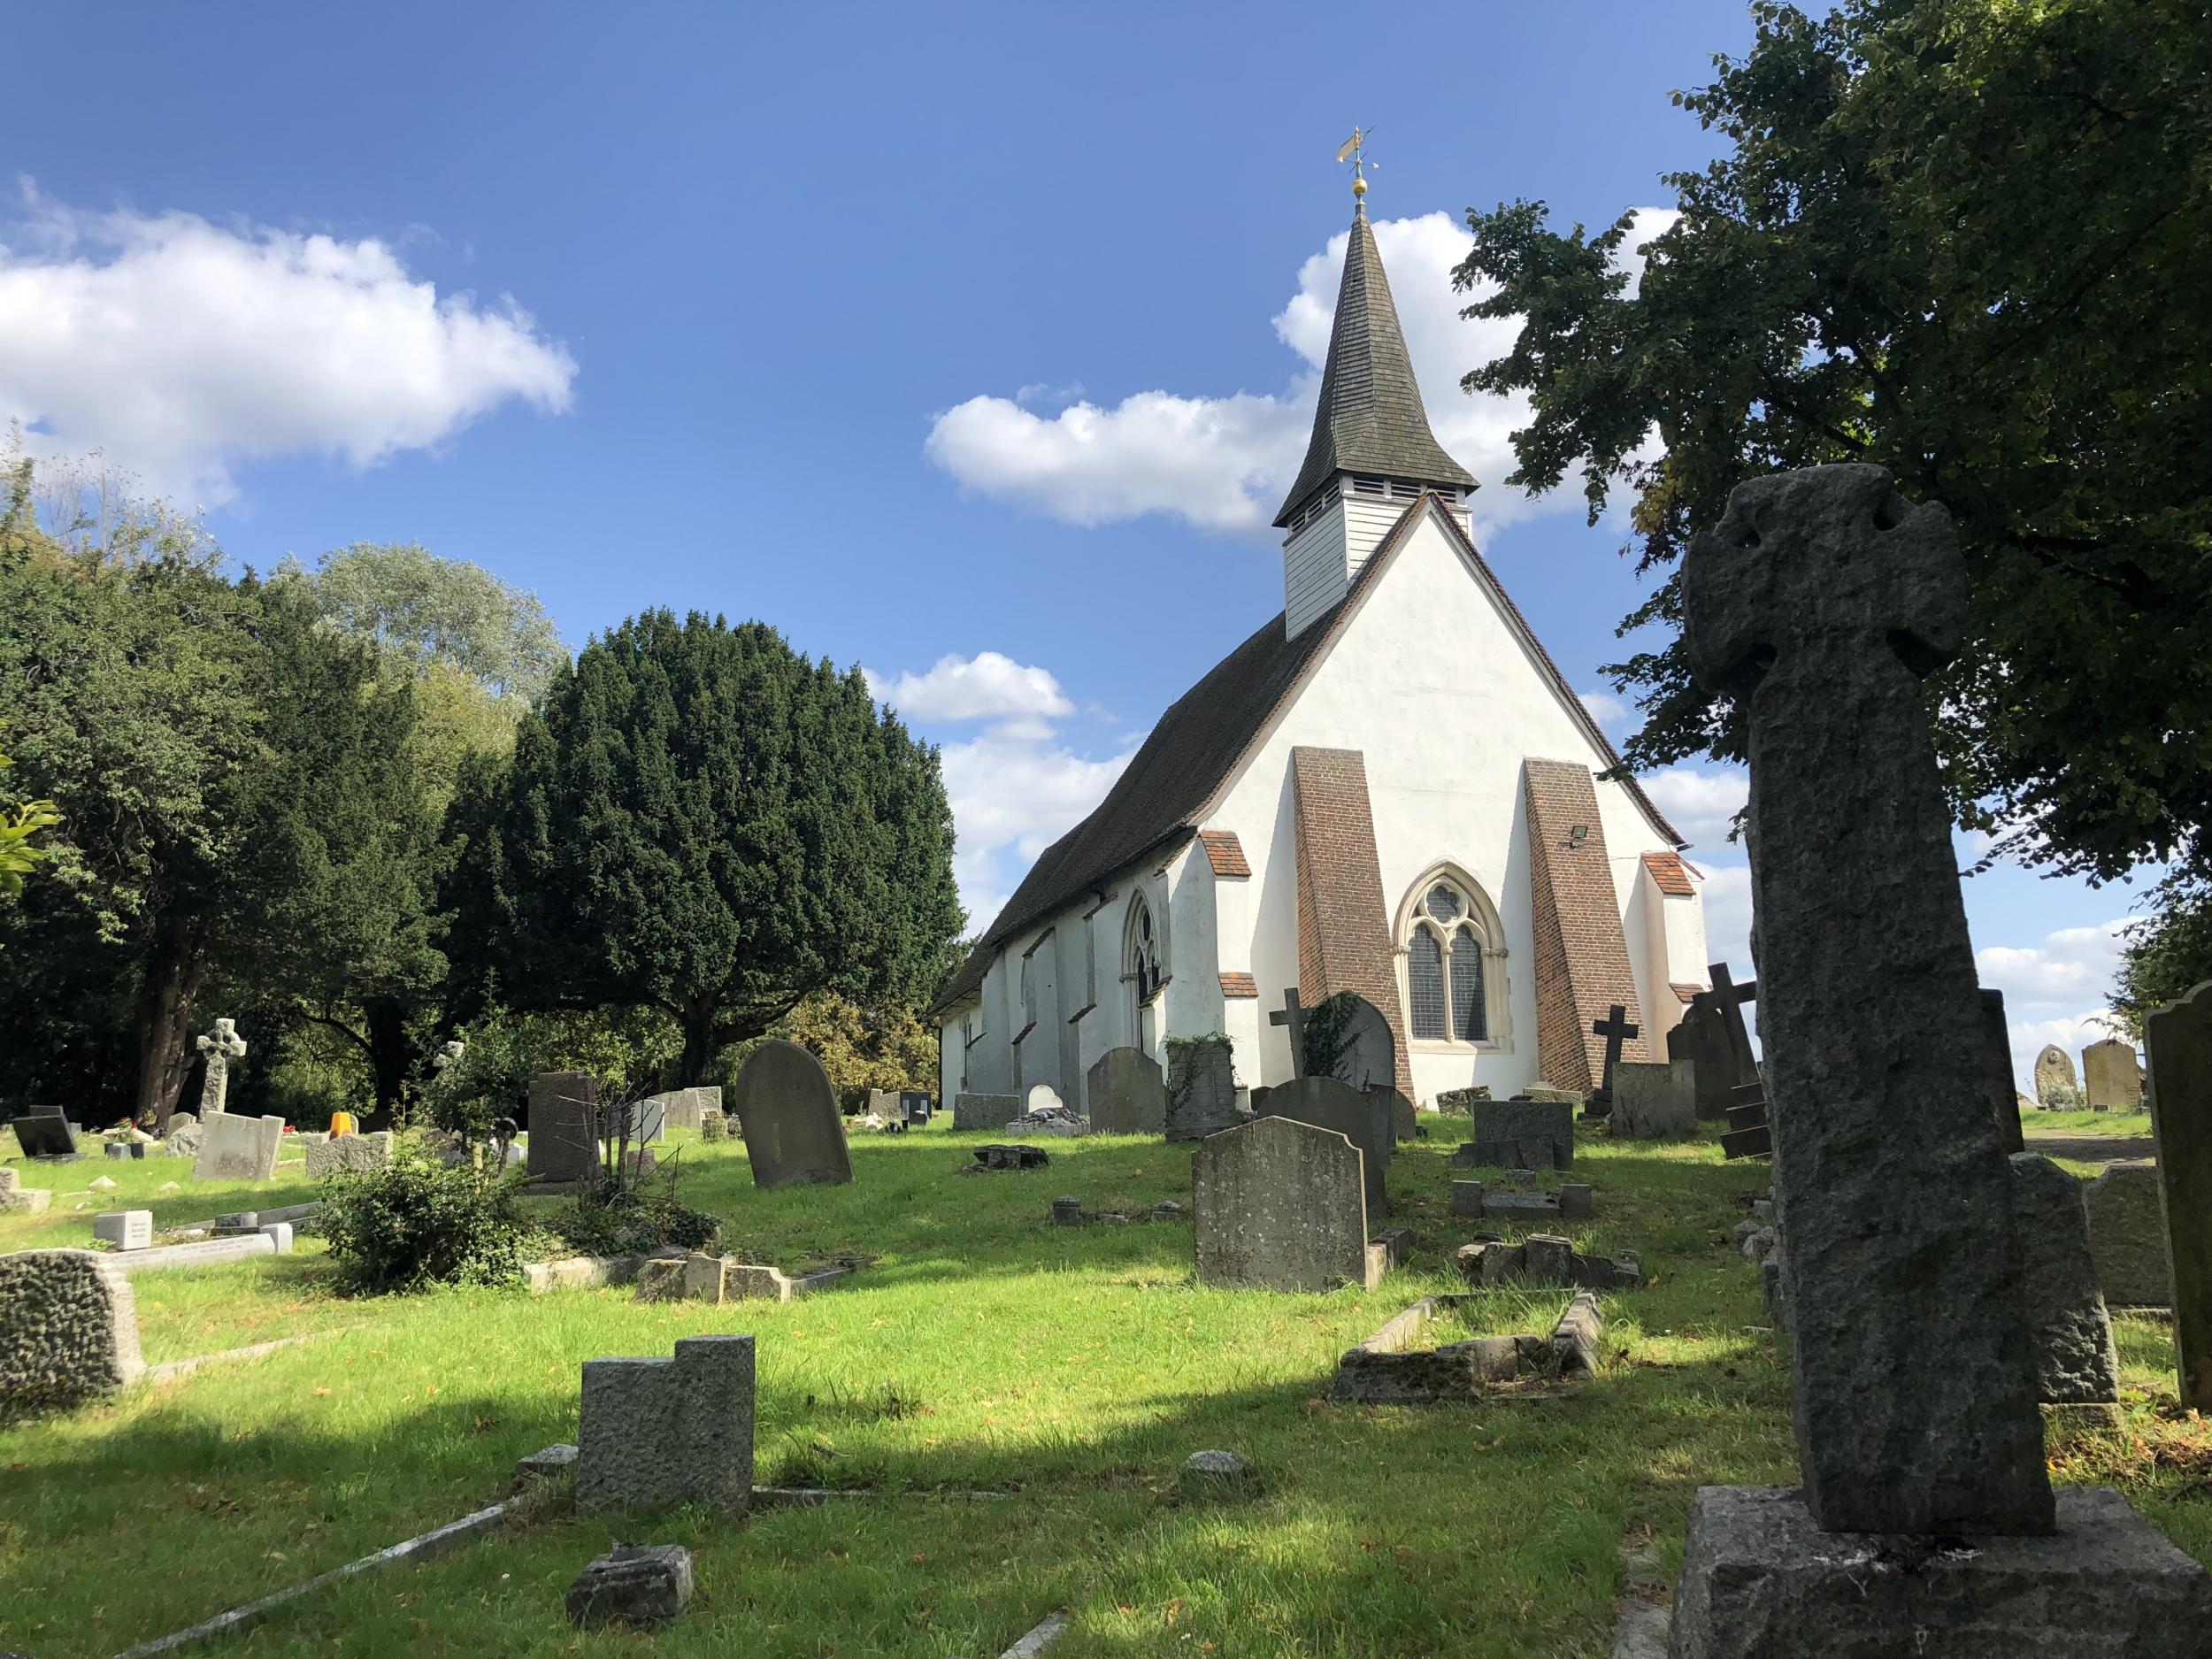 Country idyll: St Mary's, ‘the Church on the Hill’ in Northolt